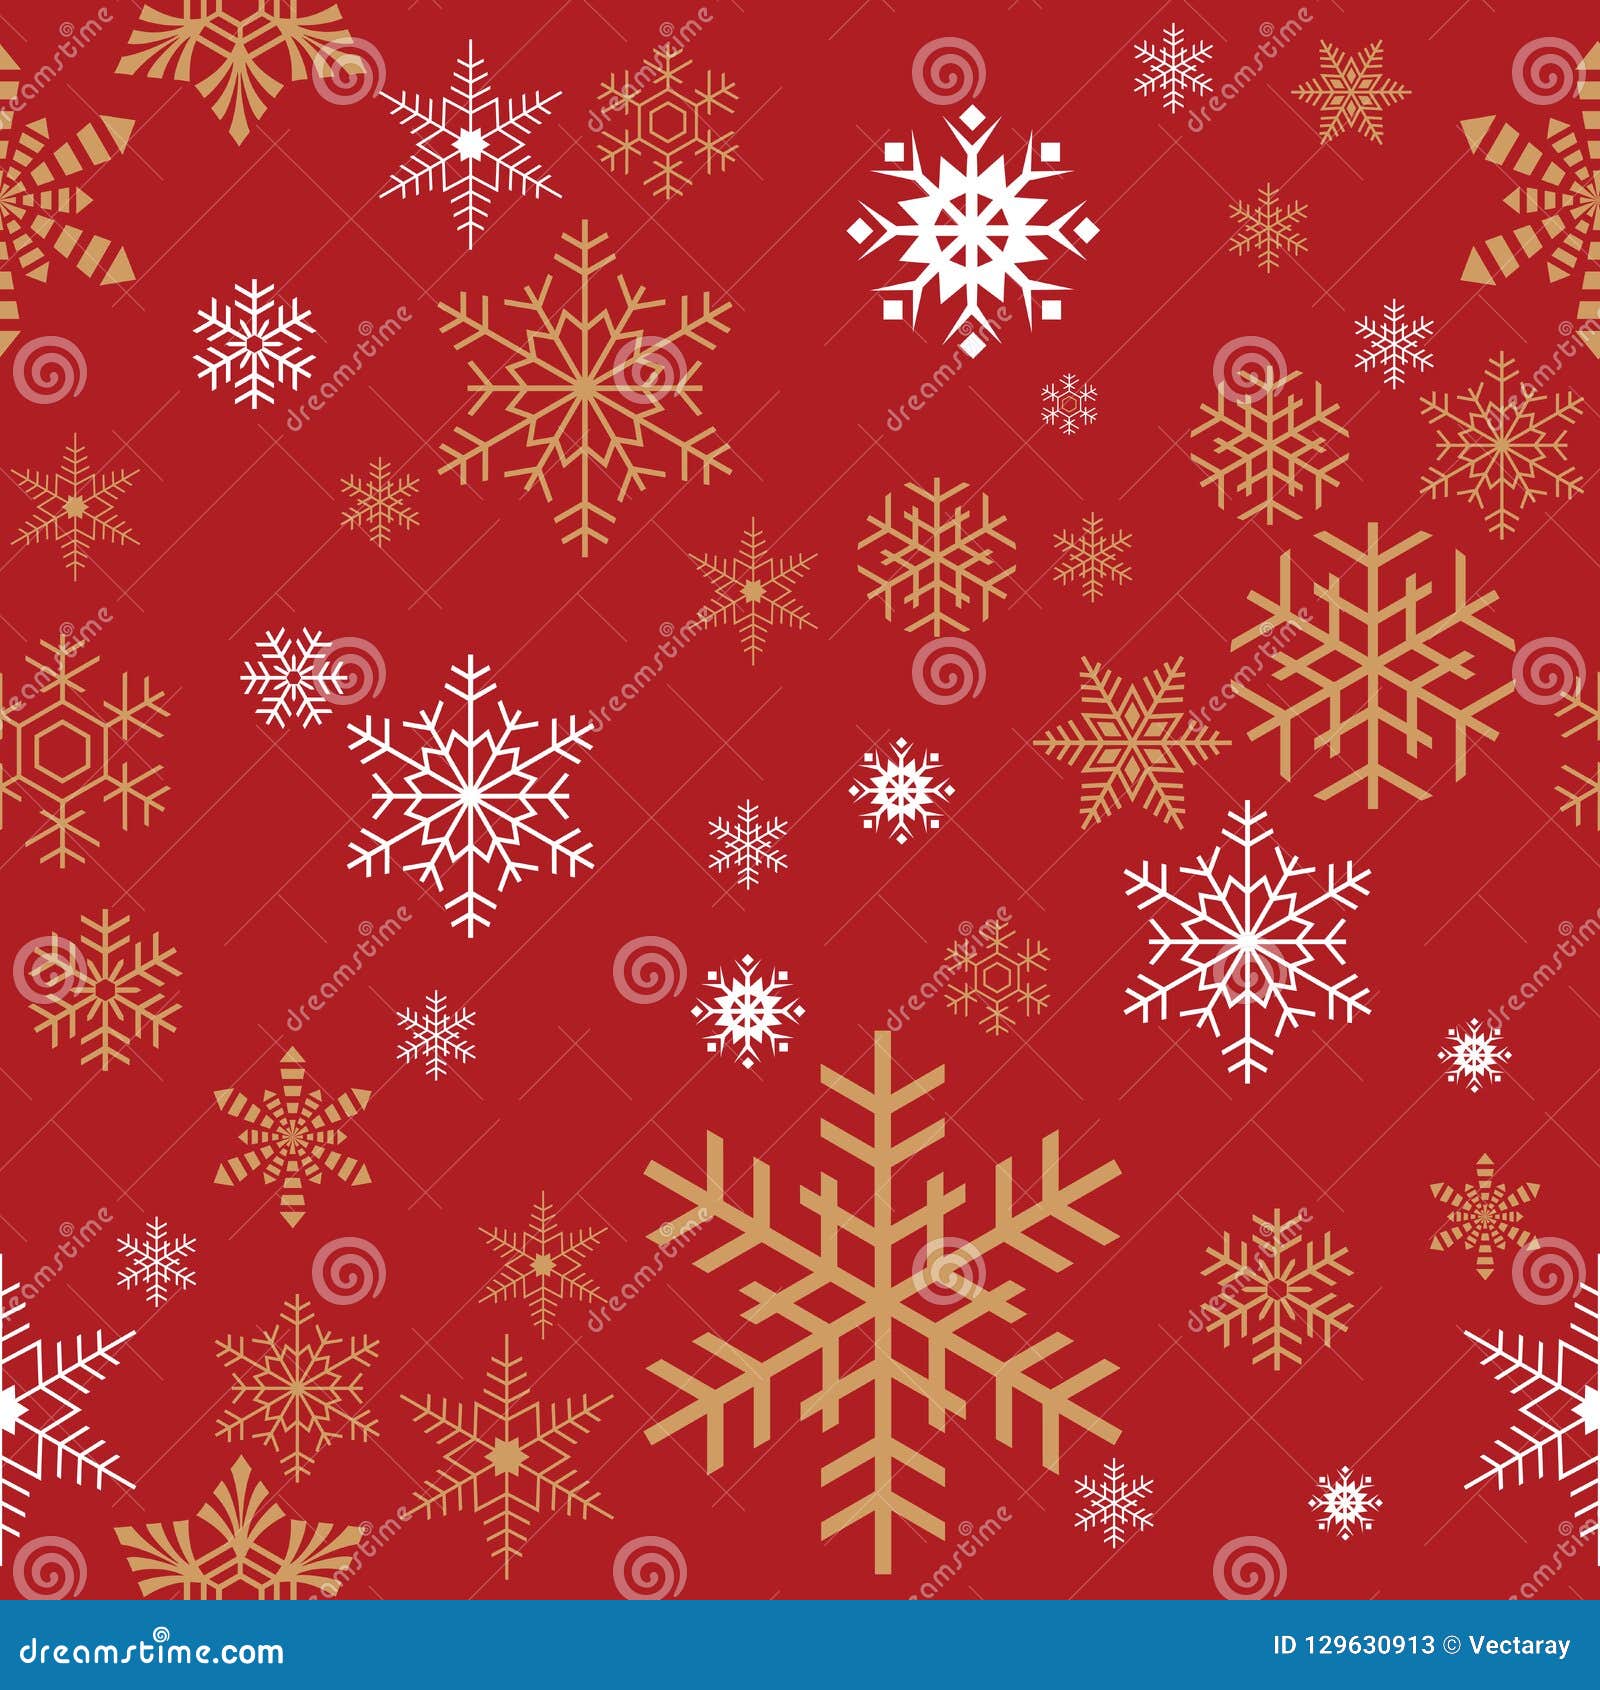 3272235 Wrapping Paper Pattern Images Stock Photos  Vectors   Shutterstock